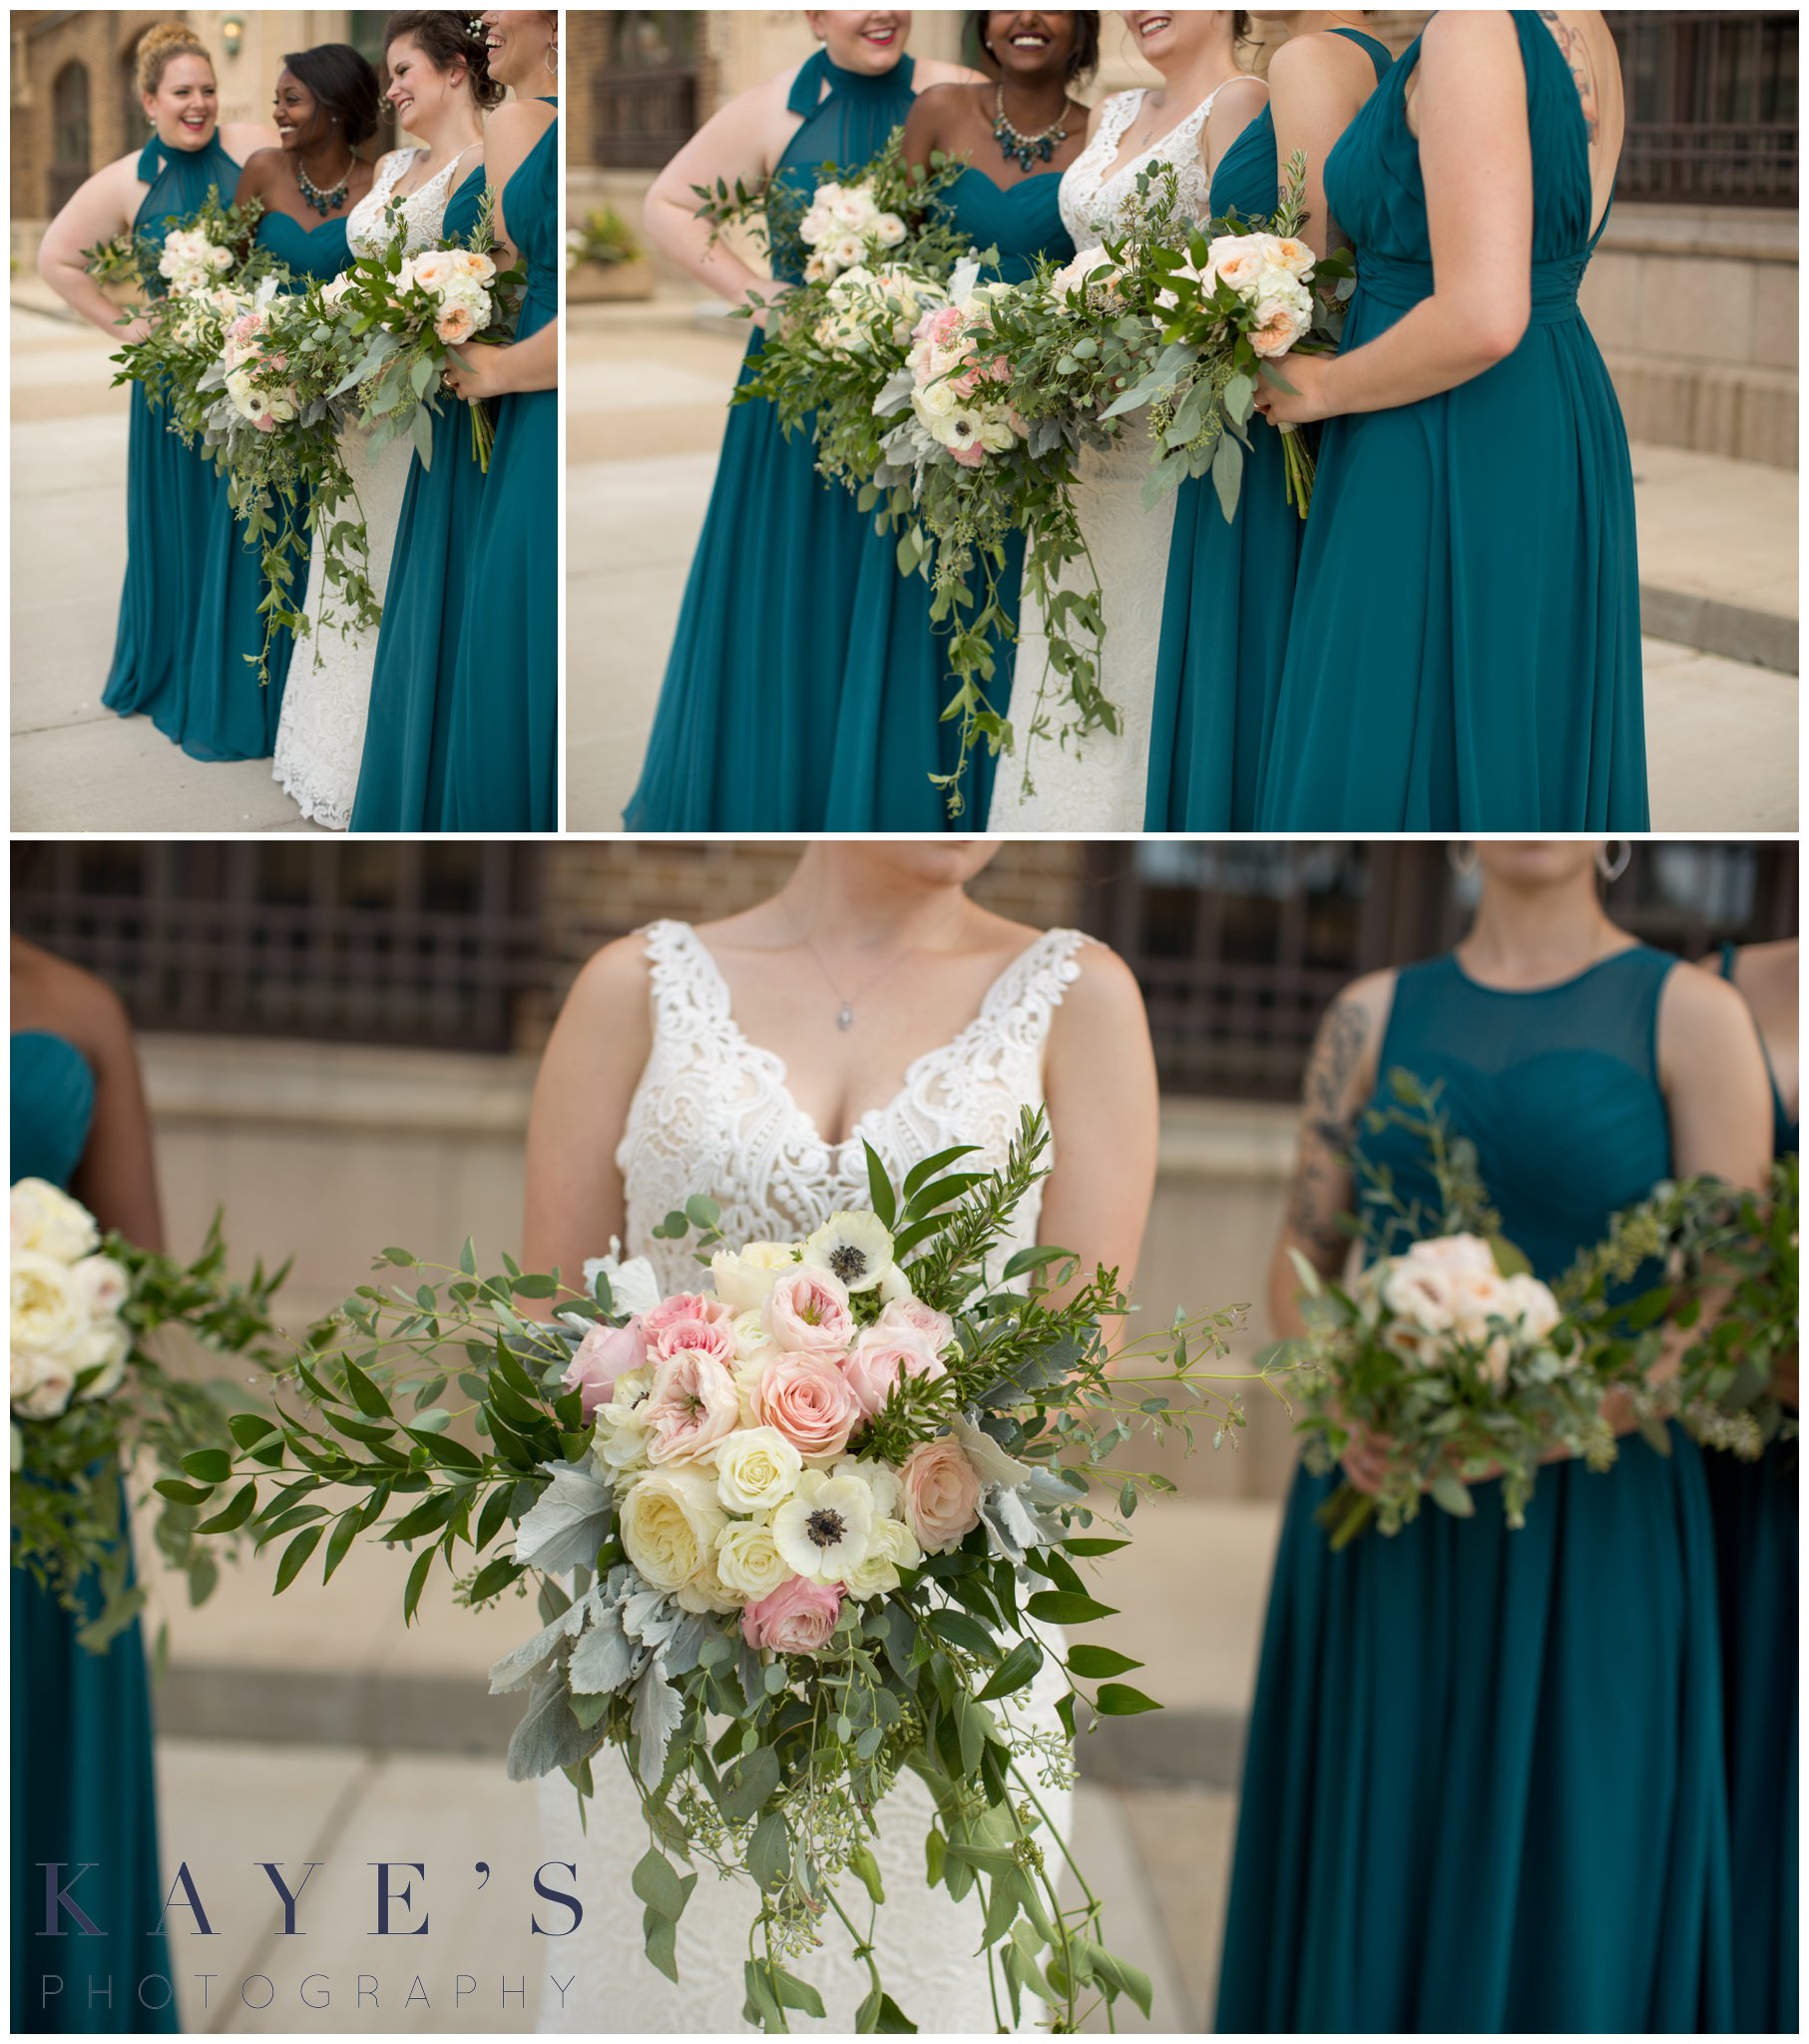 wedding bouquets for bride and bridesmaids